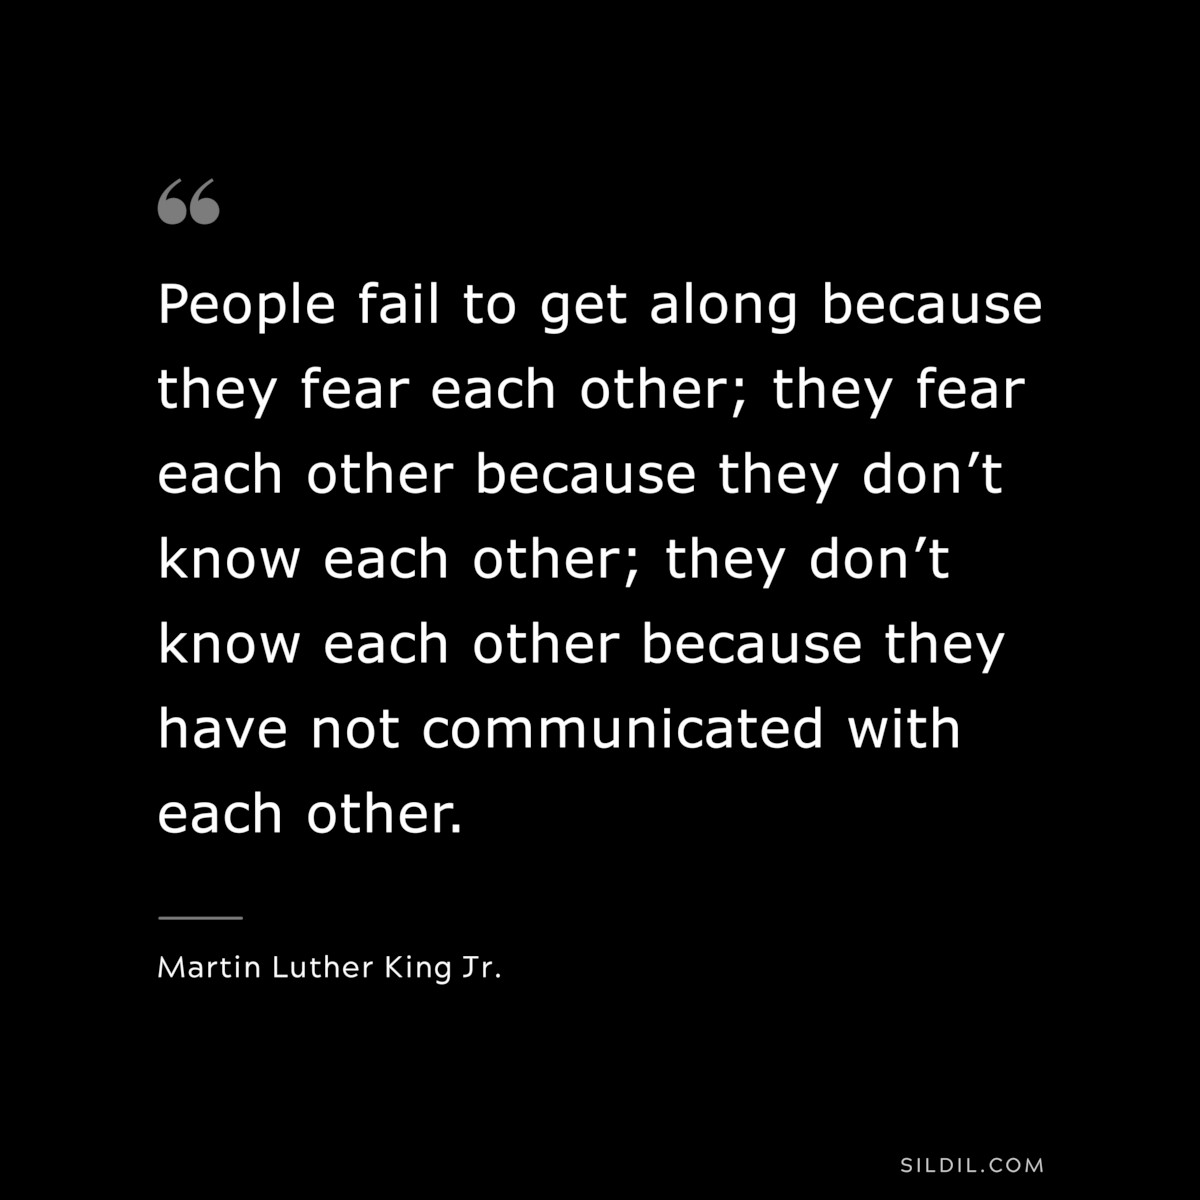 People fail to get along because they fear each other; they fear each other because they don’t know each other; they don’t know each other because they have not communicated with each other. ― Martin Luther King Jr.